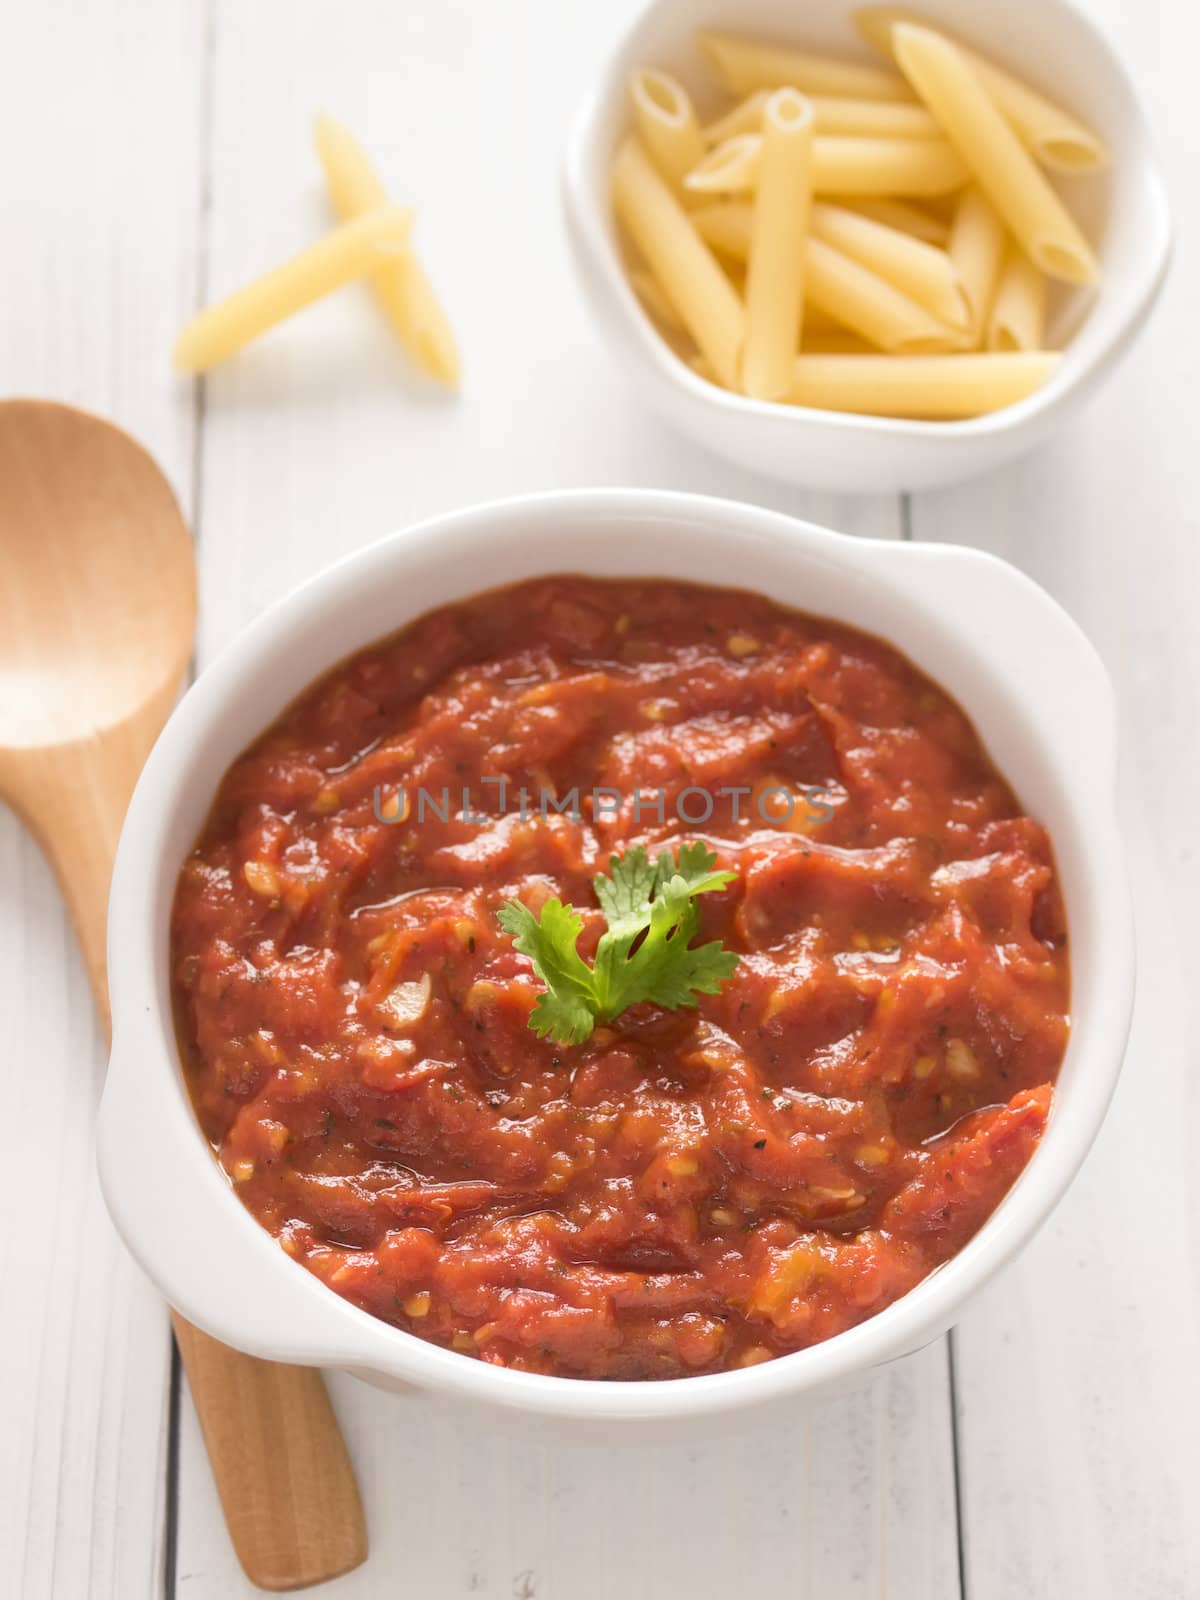 tomato sauce by zkruger